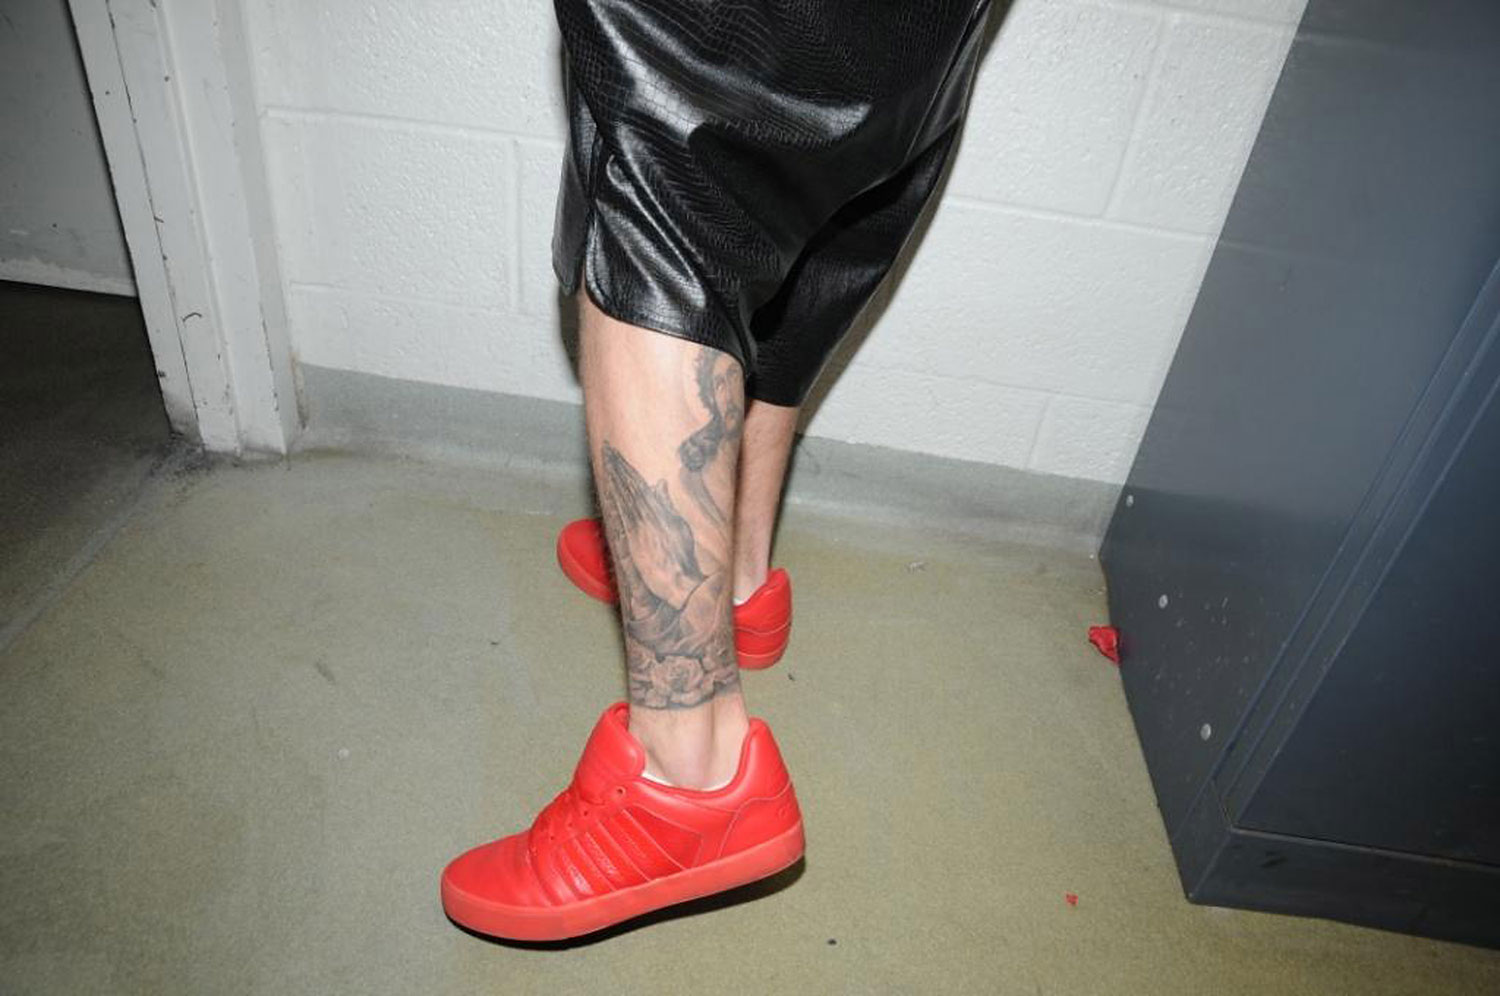 In this handout photo provided by the Miami Beach Police Department and released on March 4, 2014, singer Justin Bieber displays his tattoos for police documentation while in custody on January 23, 2014 in Miami Beach, Florida. (Miami Beach Police Department/Getty Images)